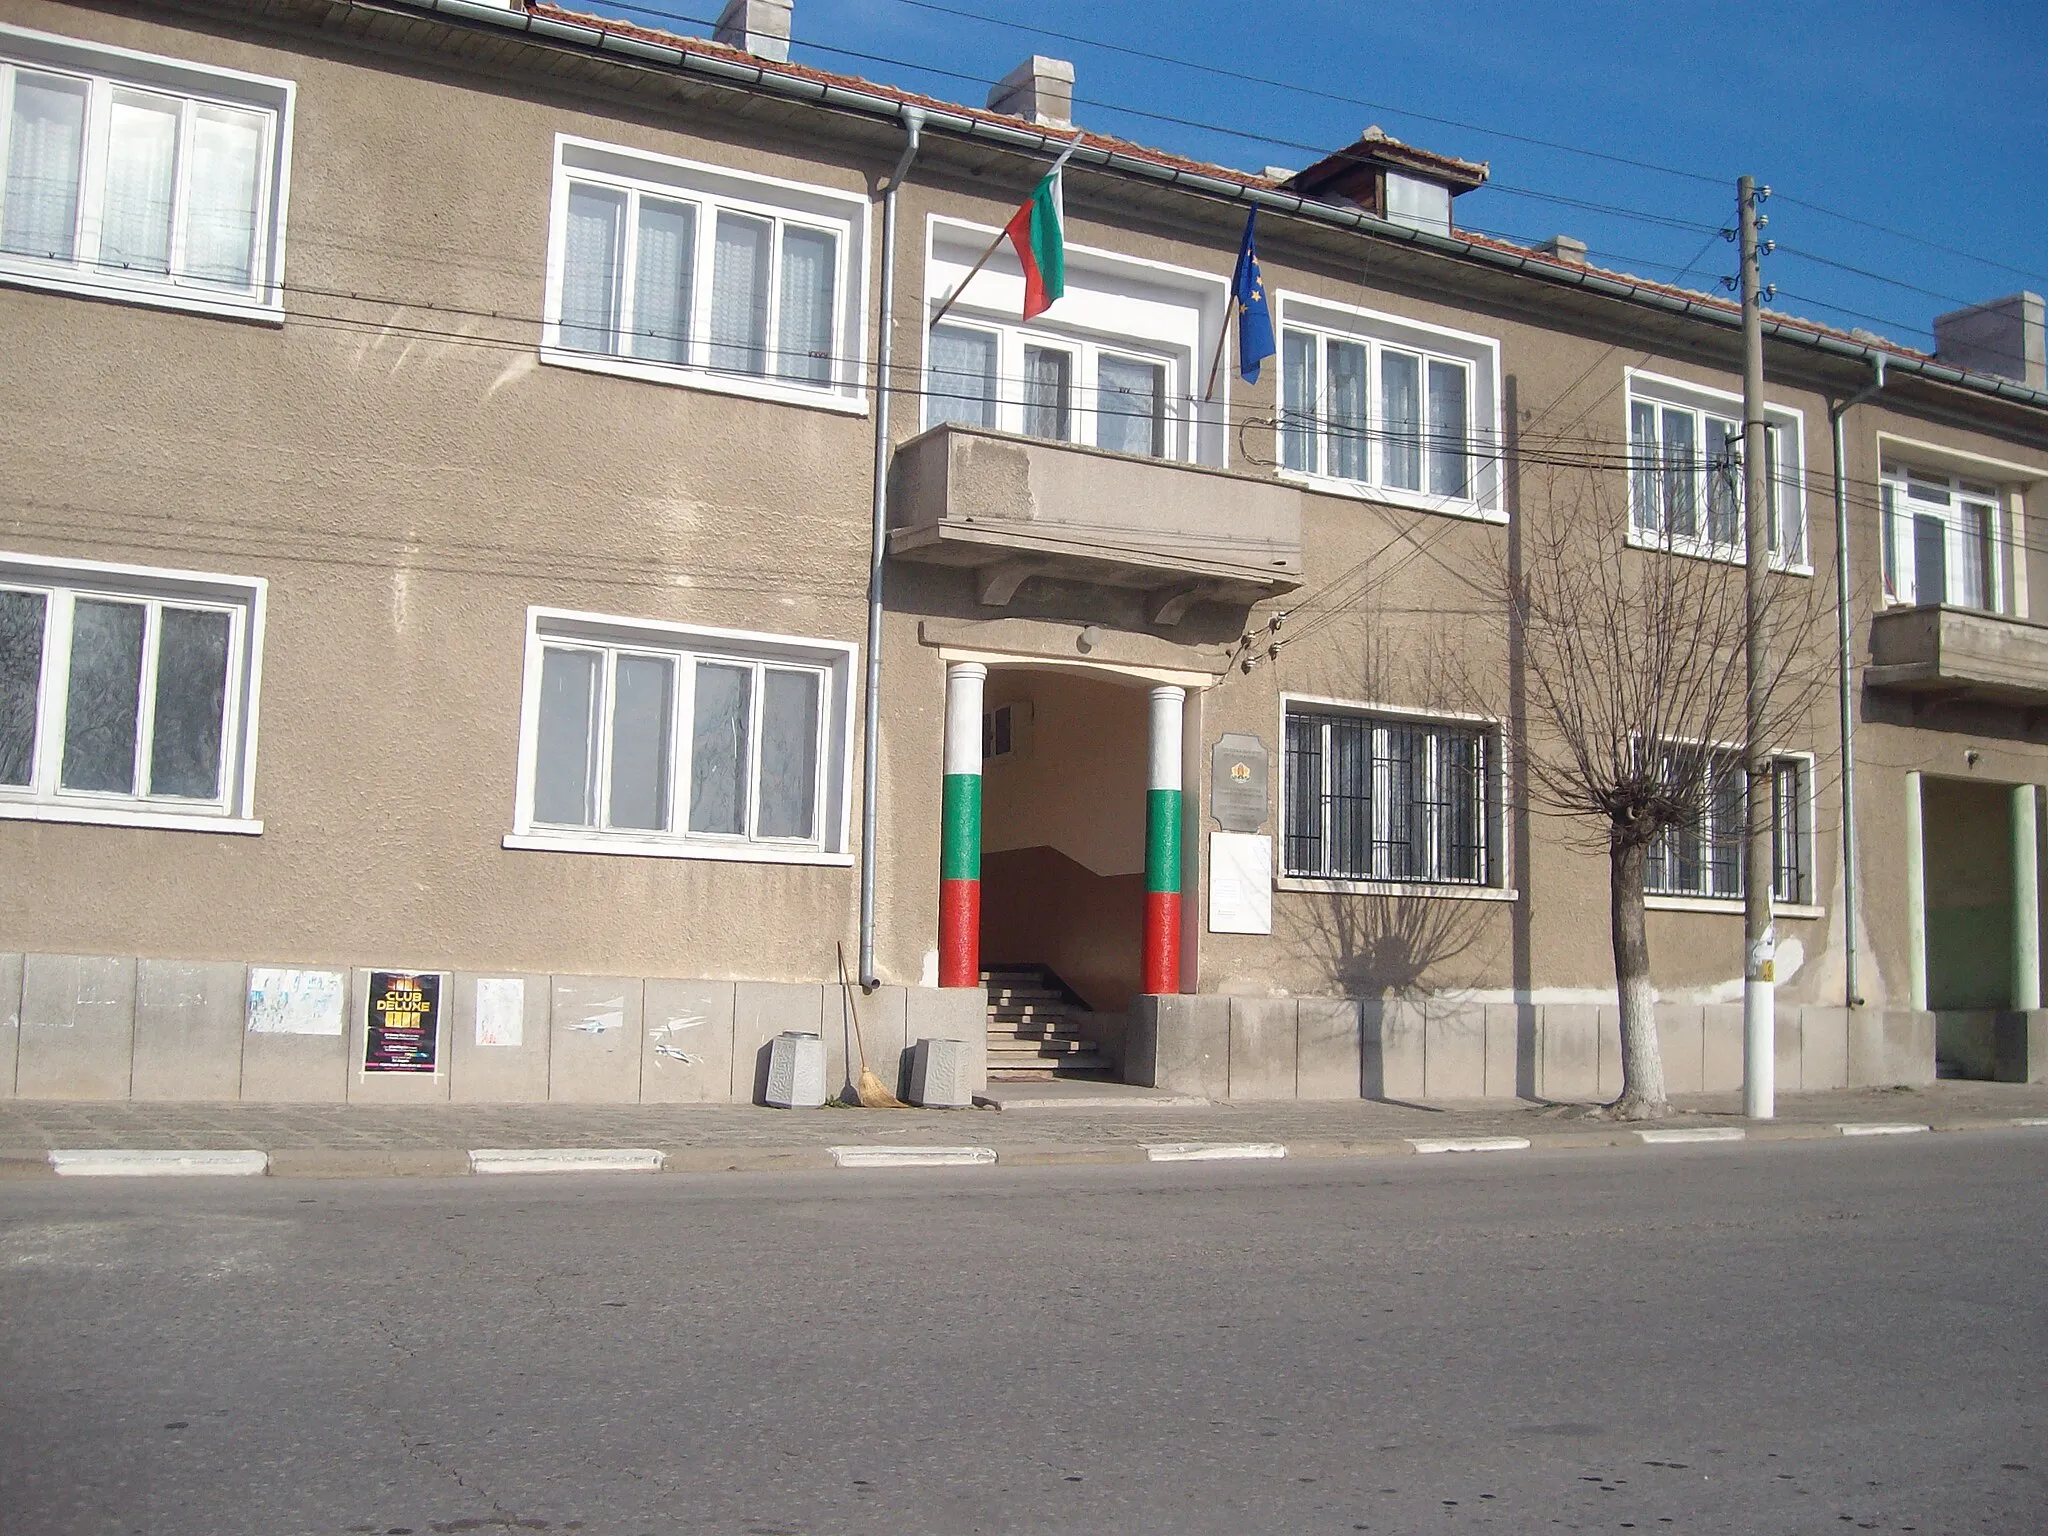 Photo showing: The mayor's office in village Patriarch Evtimovo, Bulgaria